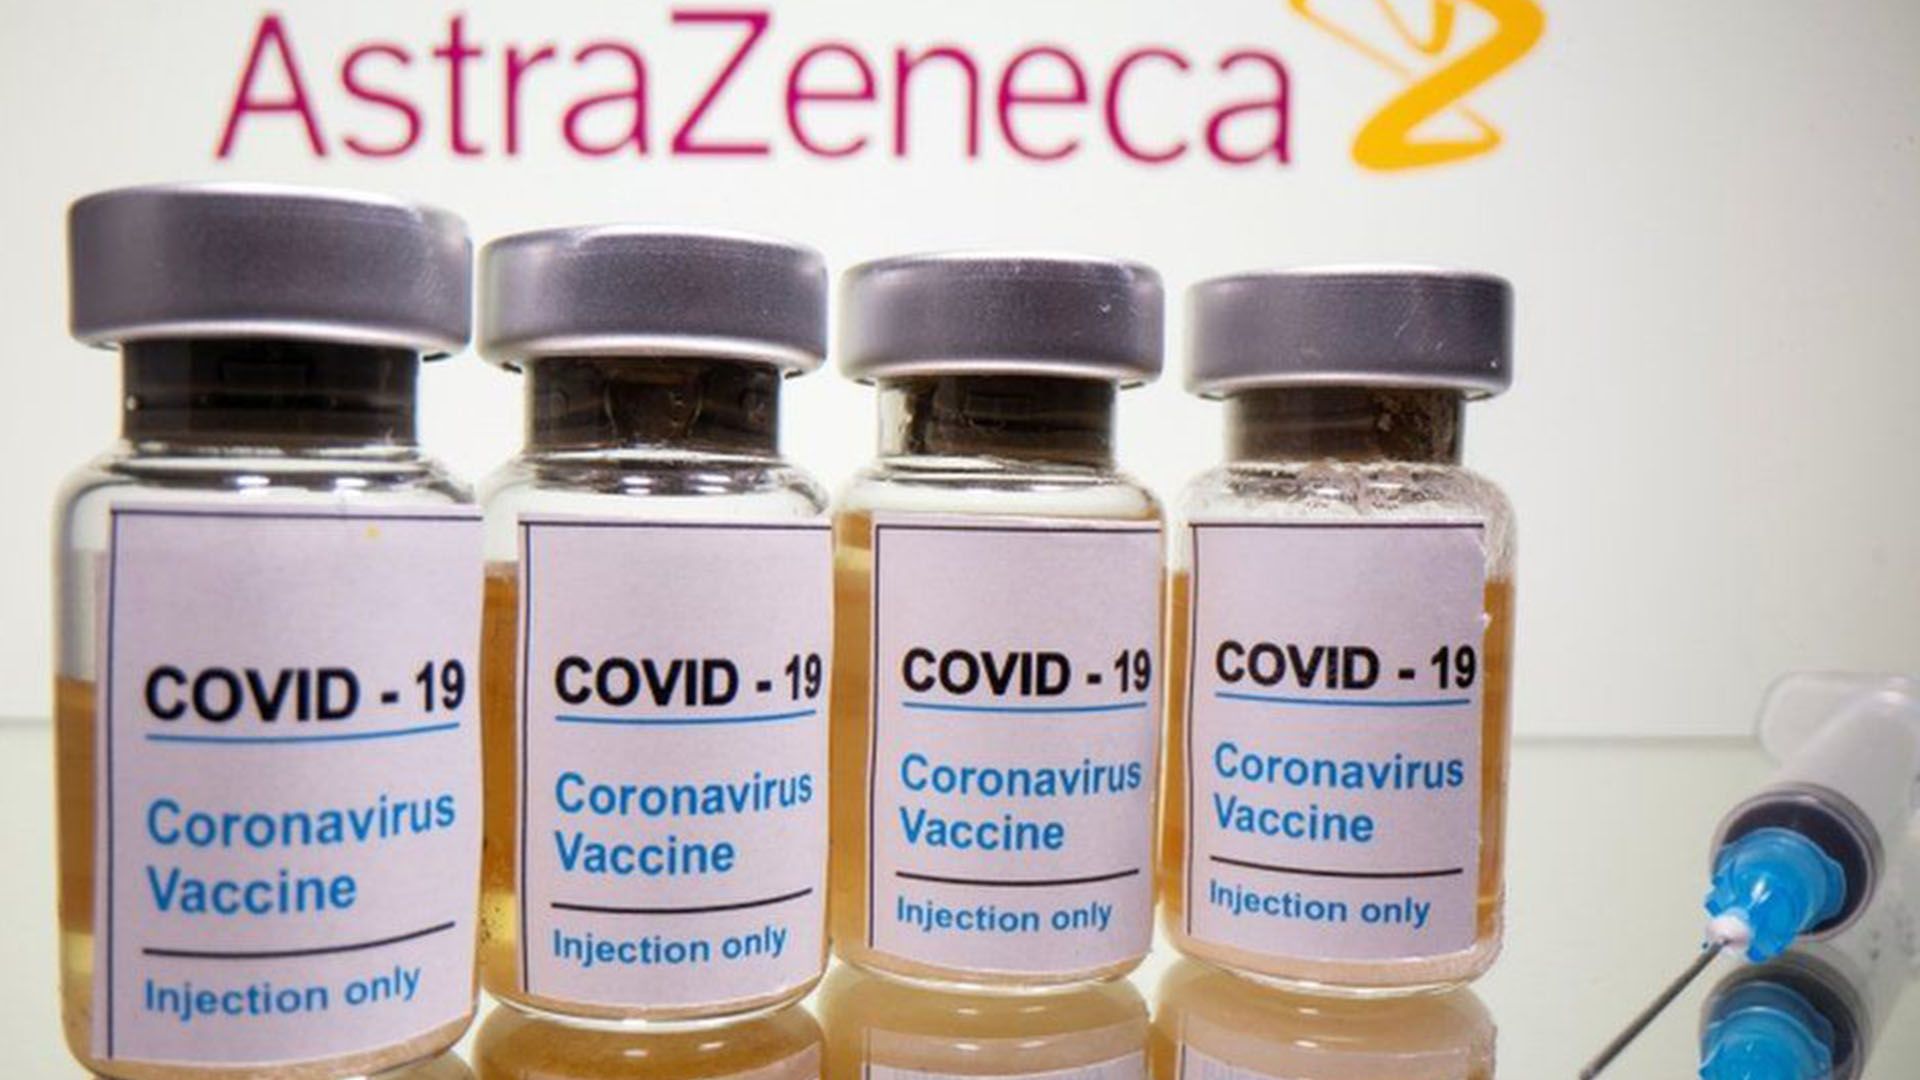 AstraZeneca vaccines also banned in France, Germany and Italy